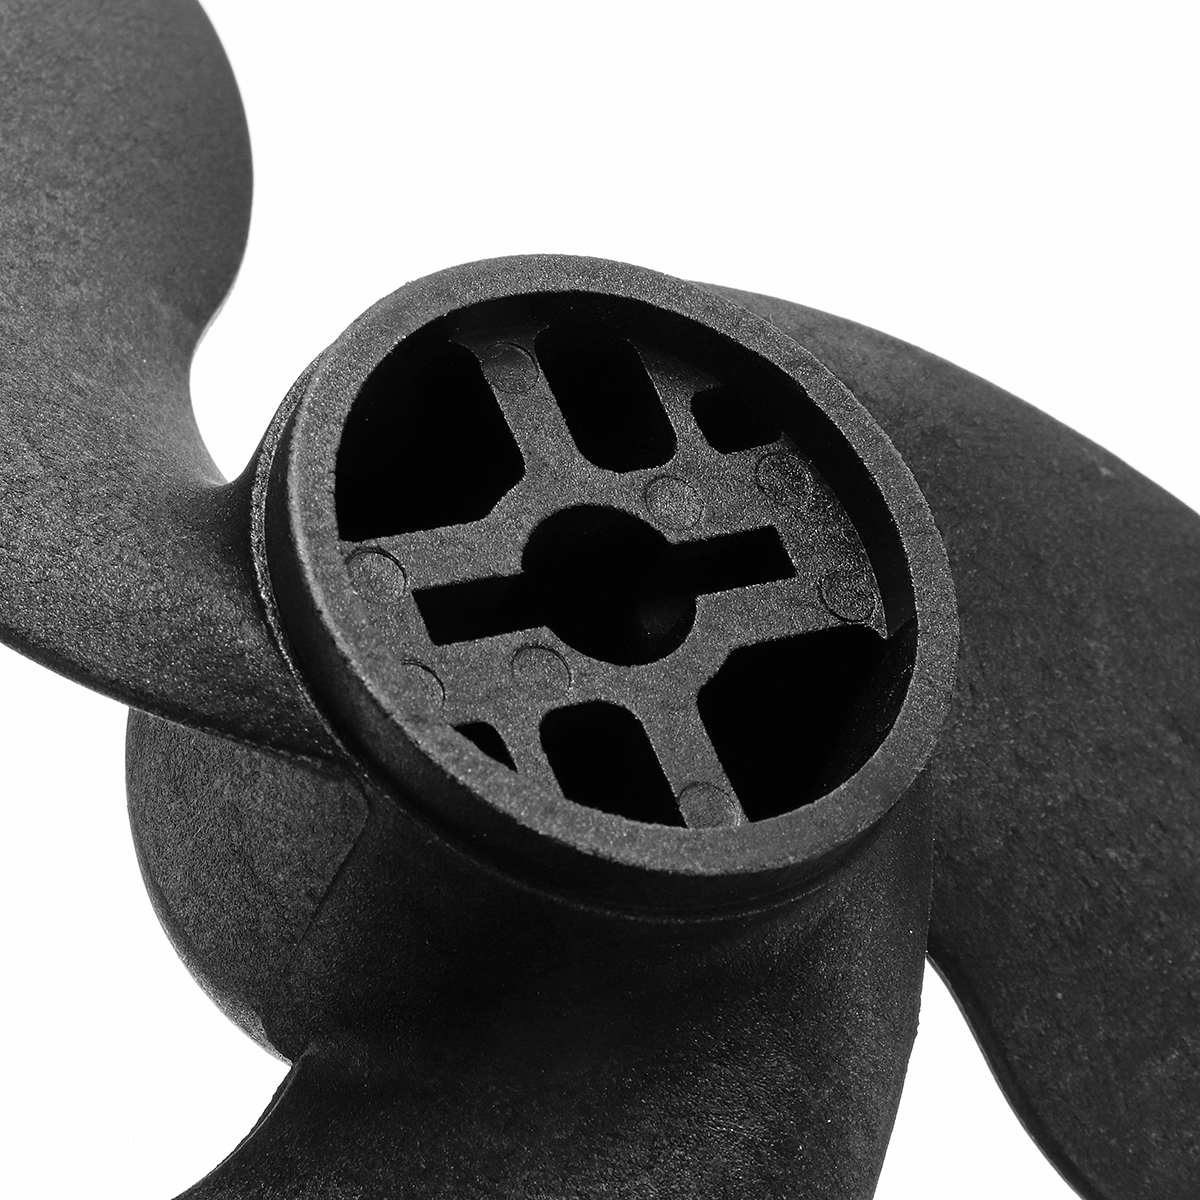 7.4 x 5.7 Marine Propeller For Nissan Tohatsu Evinrude Johnson 2.5-3.5HP 309-64107-0 Composite Plastic Outboard Propeller